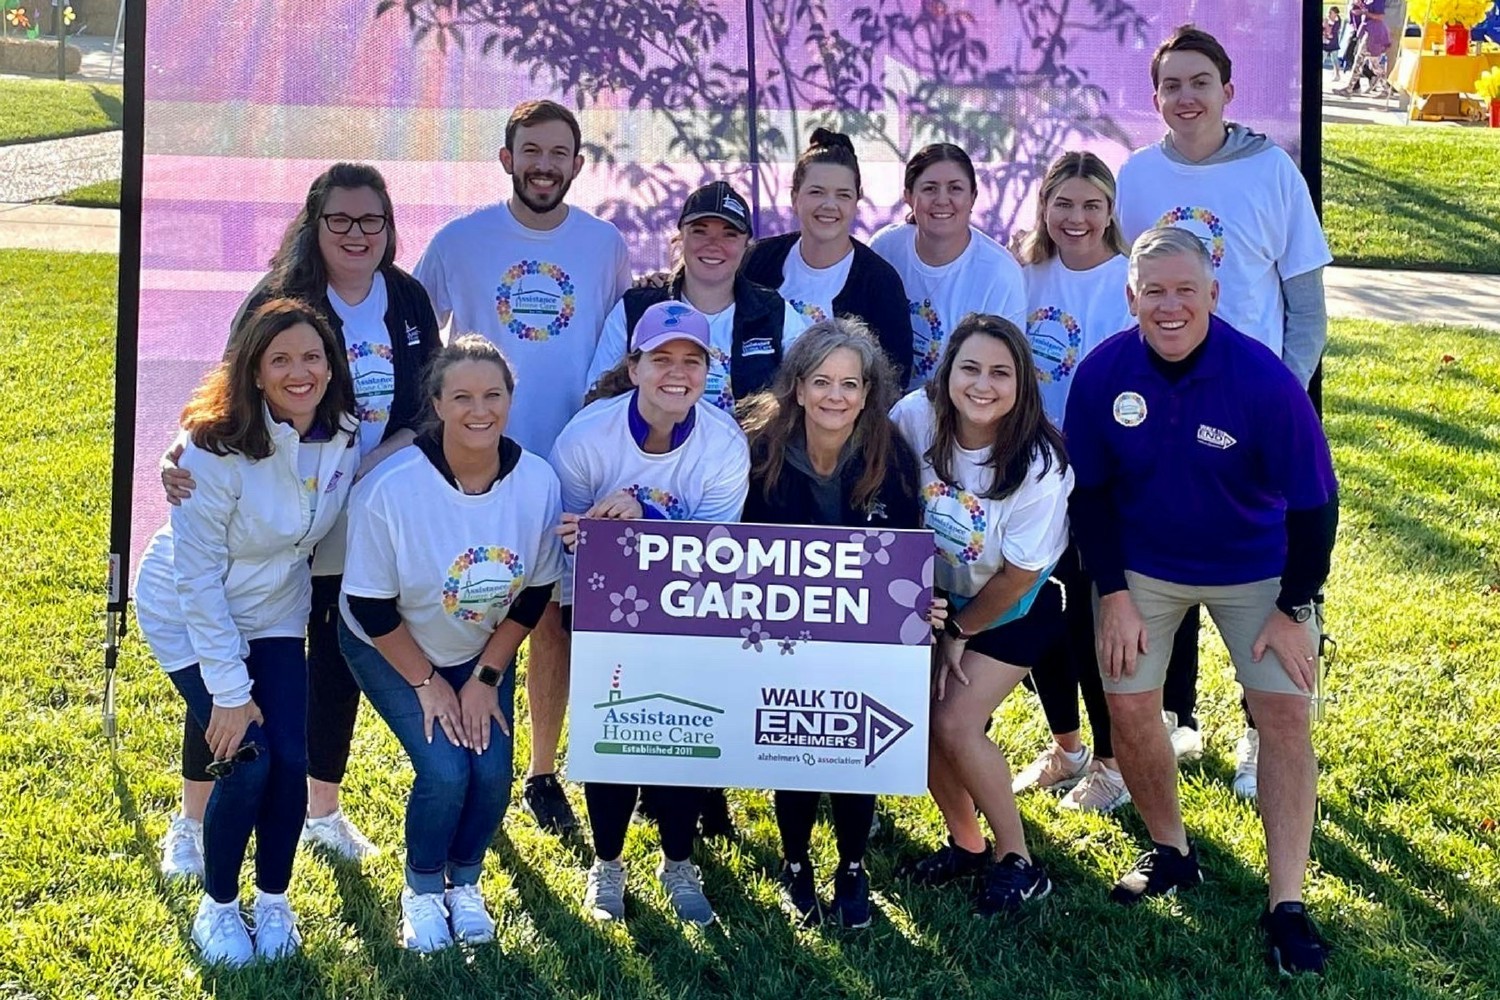 Our team volunteering at the 2022 Walk to End Alzheimer's, sponsoring the 'Promise Garden' 